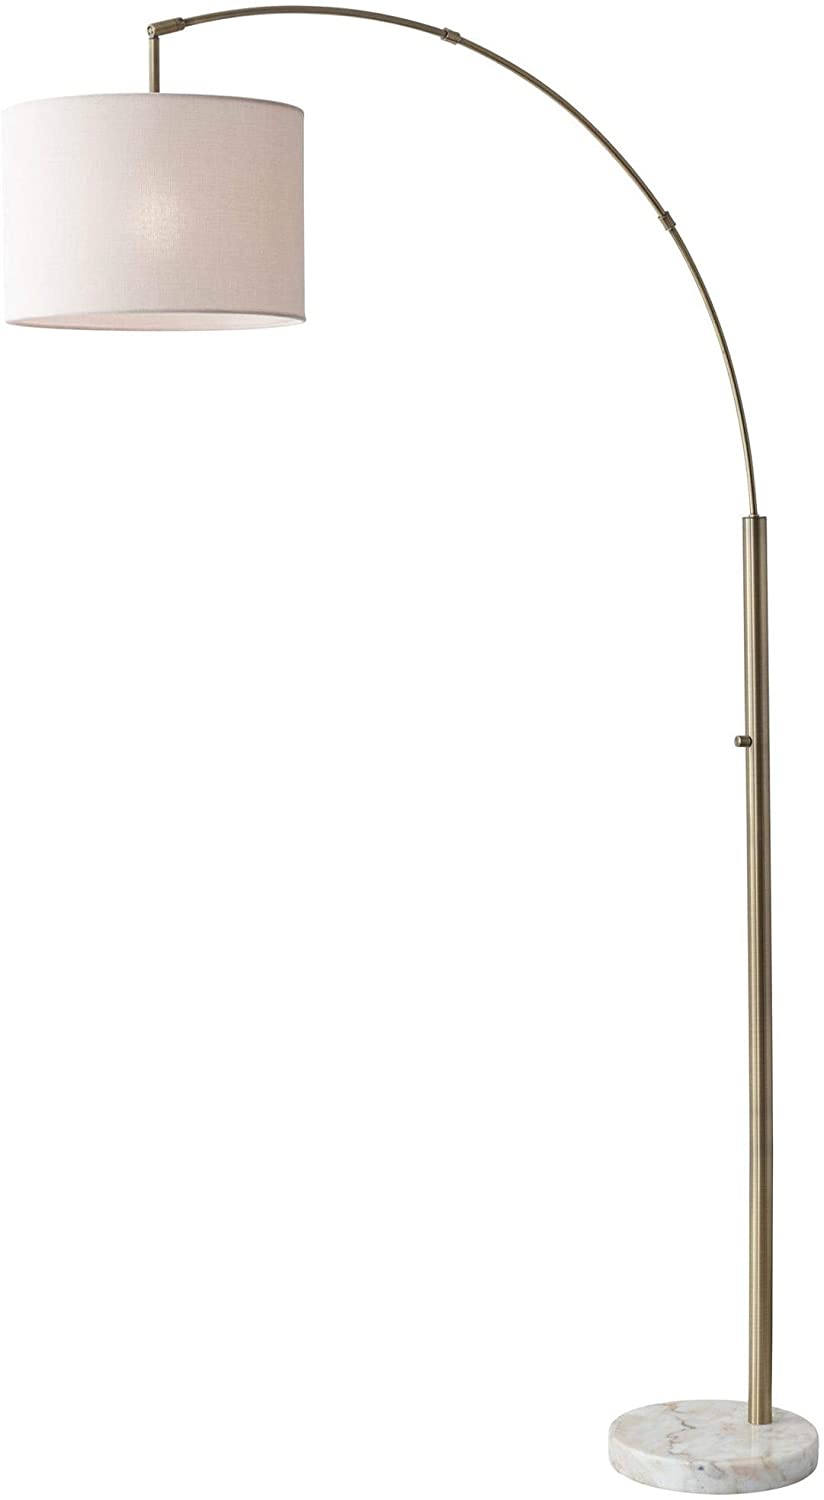 74" Brass Arc Floor Lamp With Off White Solid Color Drum Shade